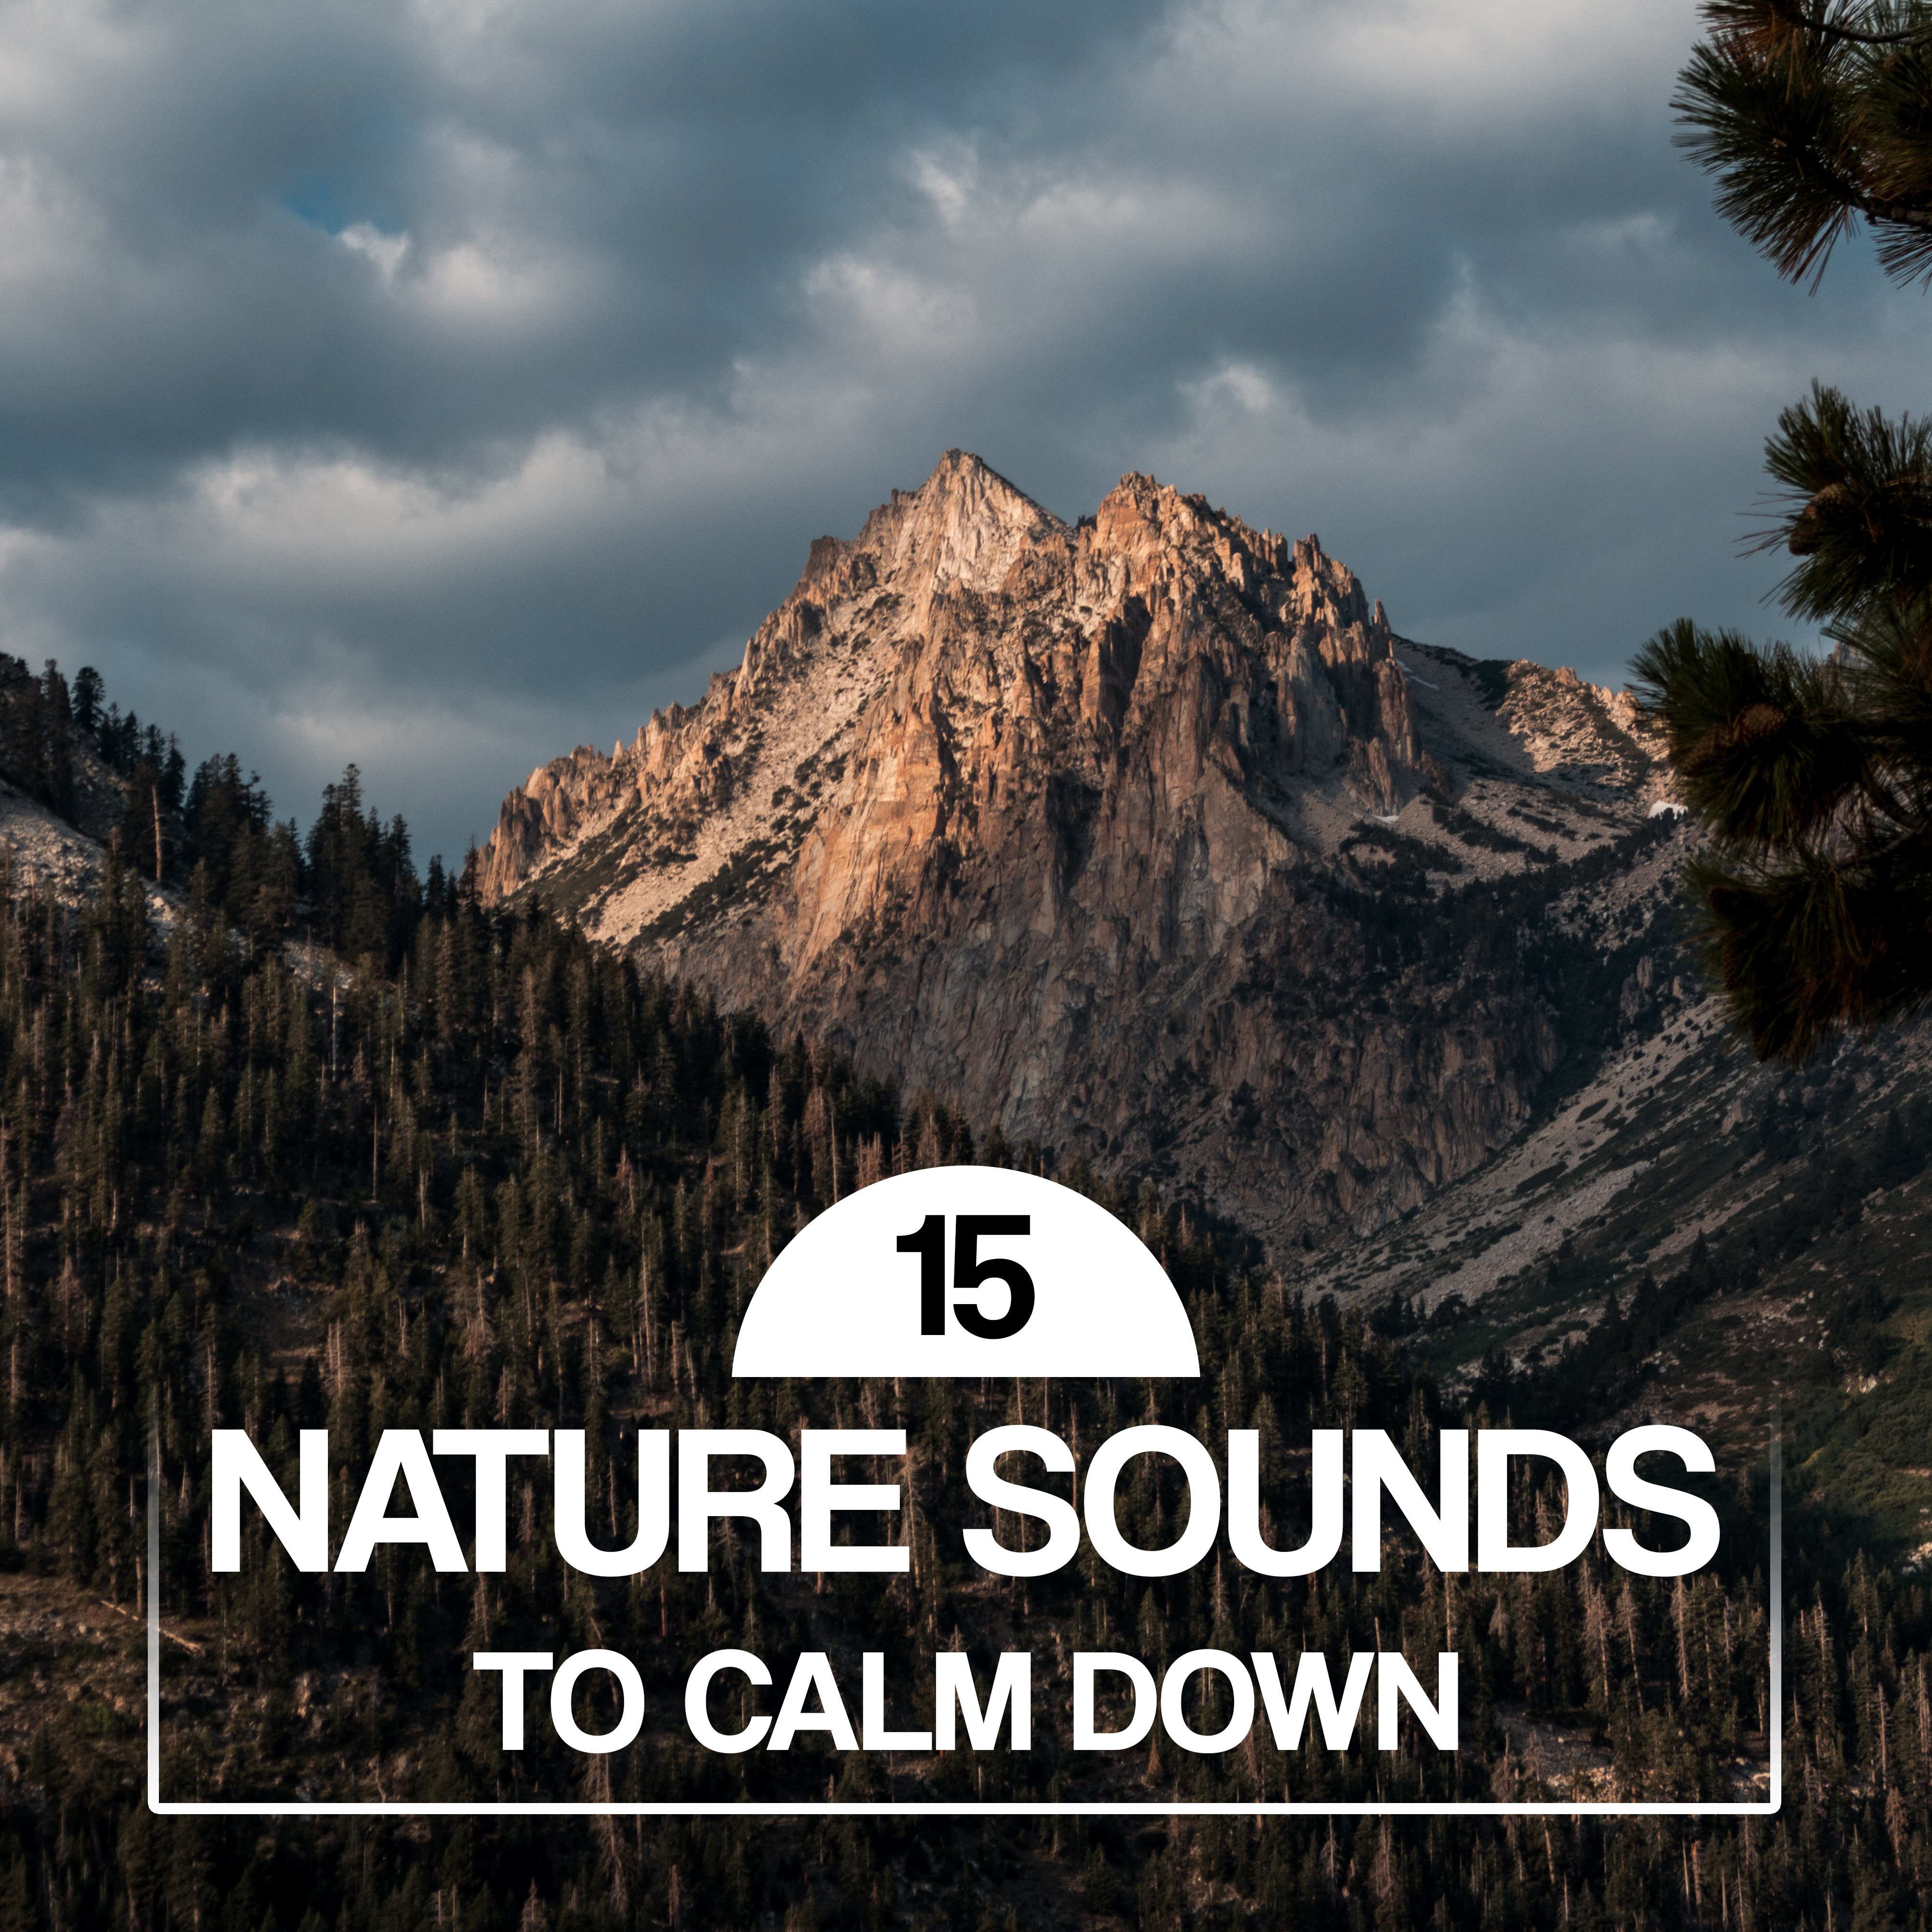 15 Nature Sounds to Calm Down